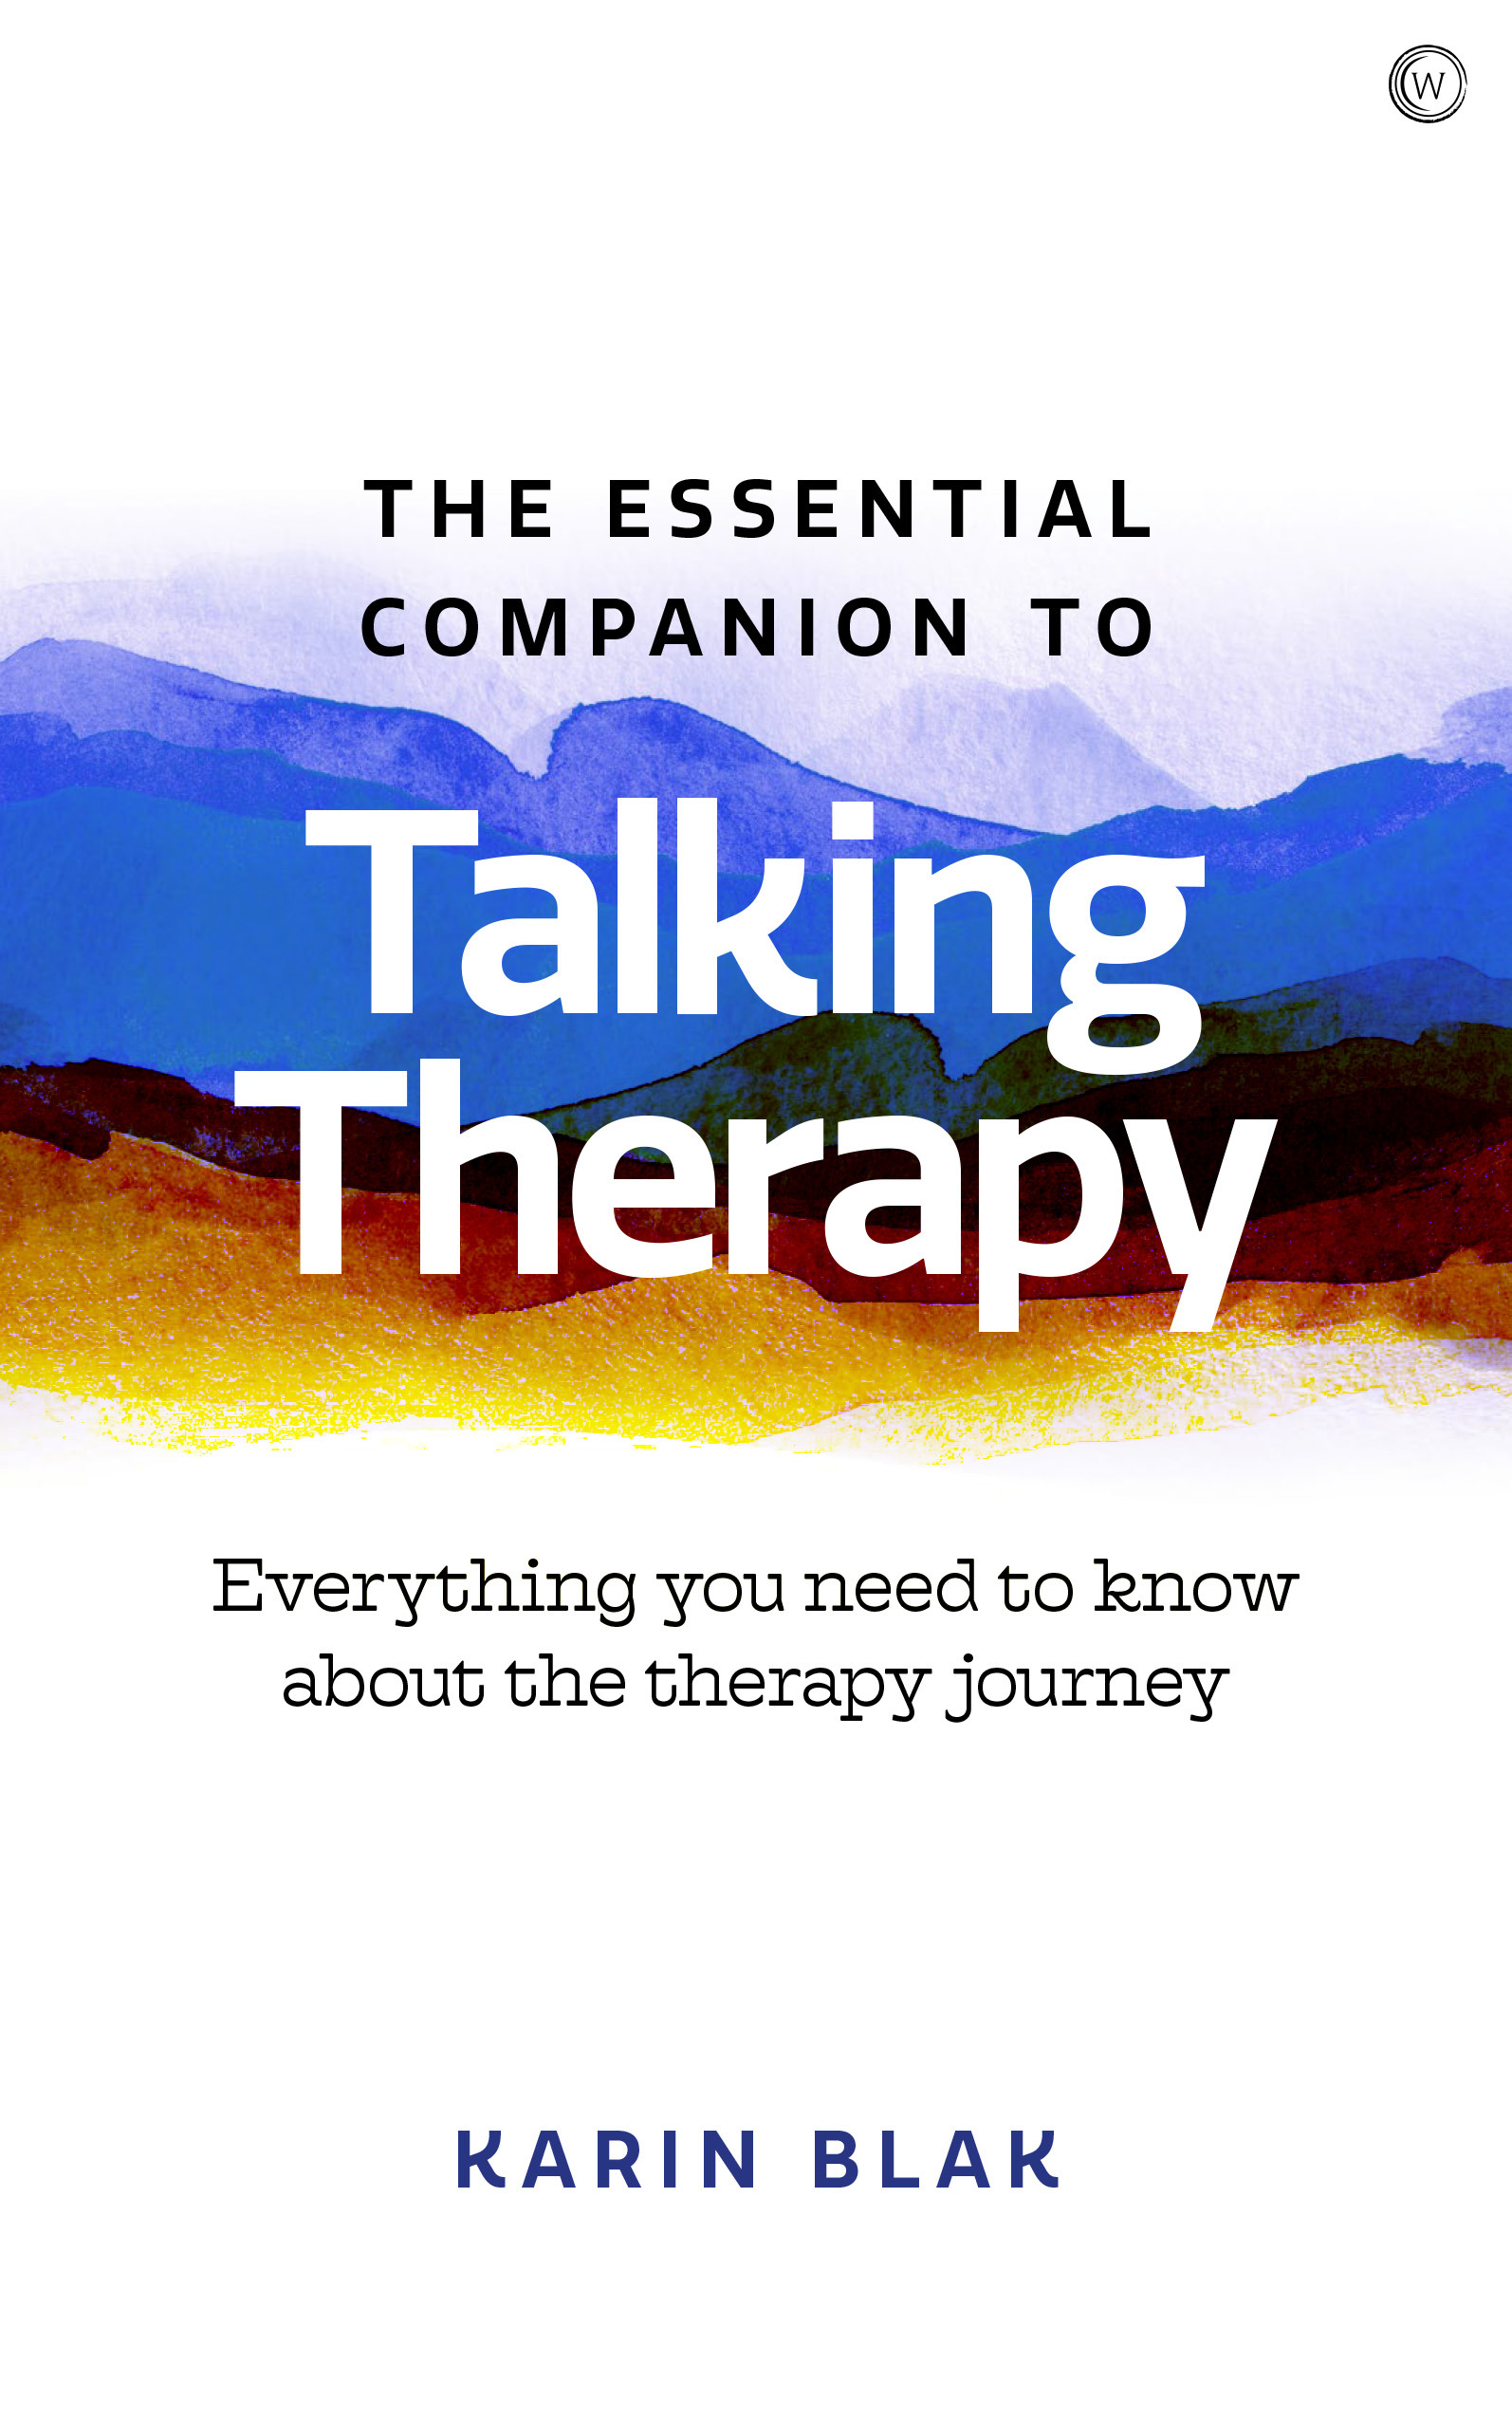 The Essential Companion to Talking Therapy